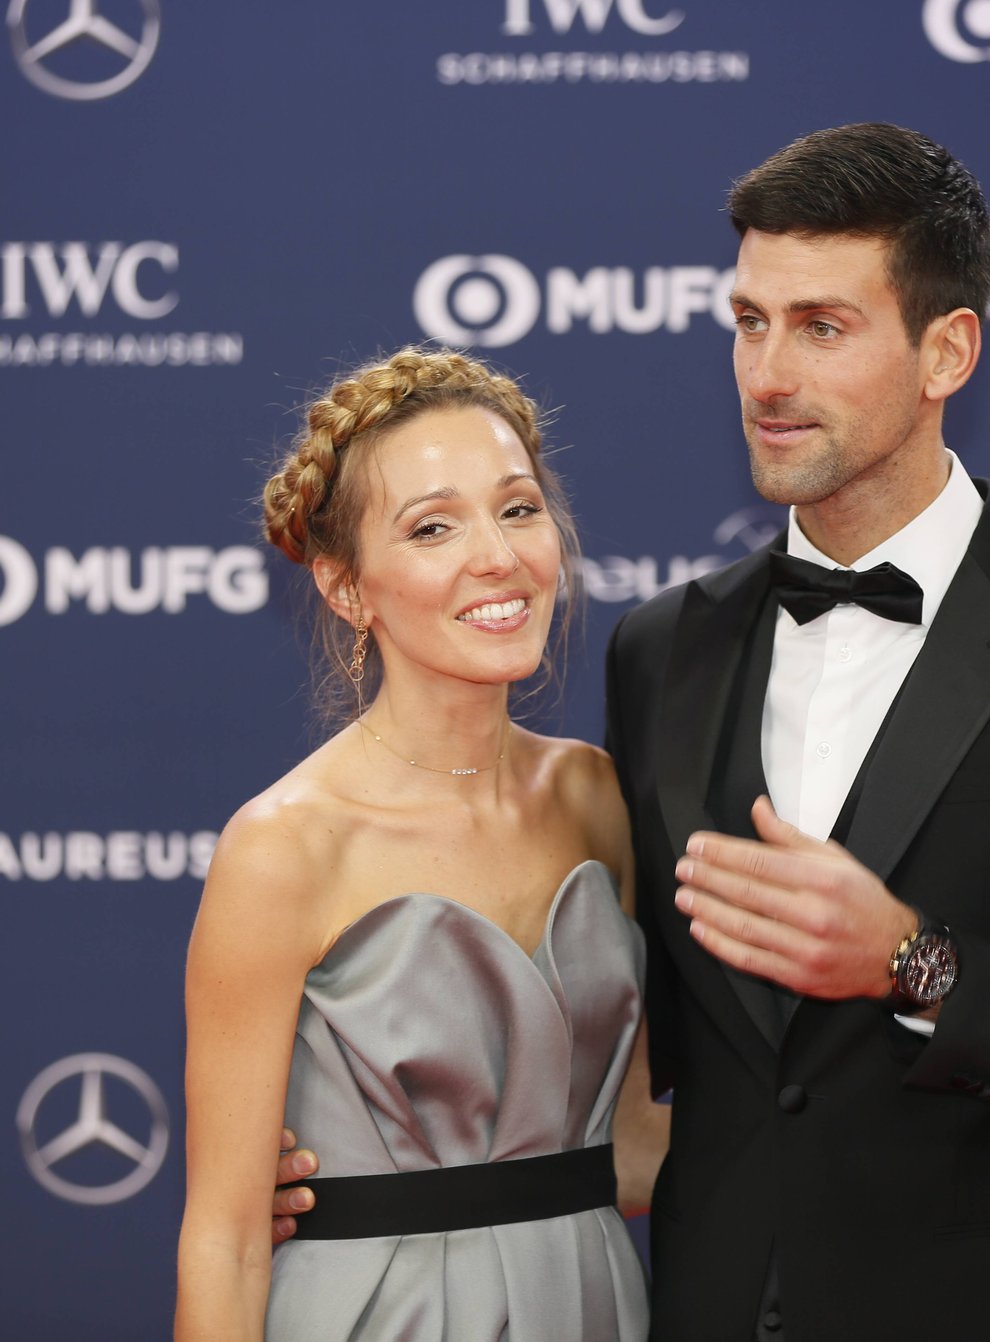 Novak allowed his wife Jelena to cut his hair while in lockdown (PA Images)